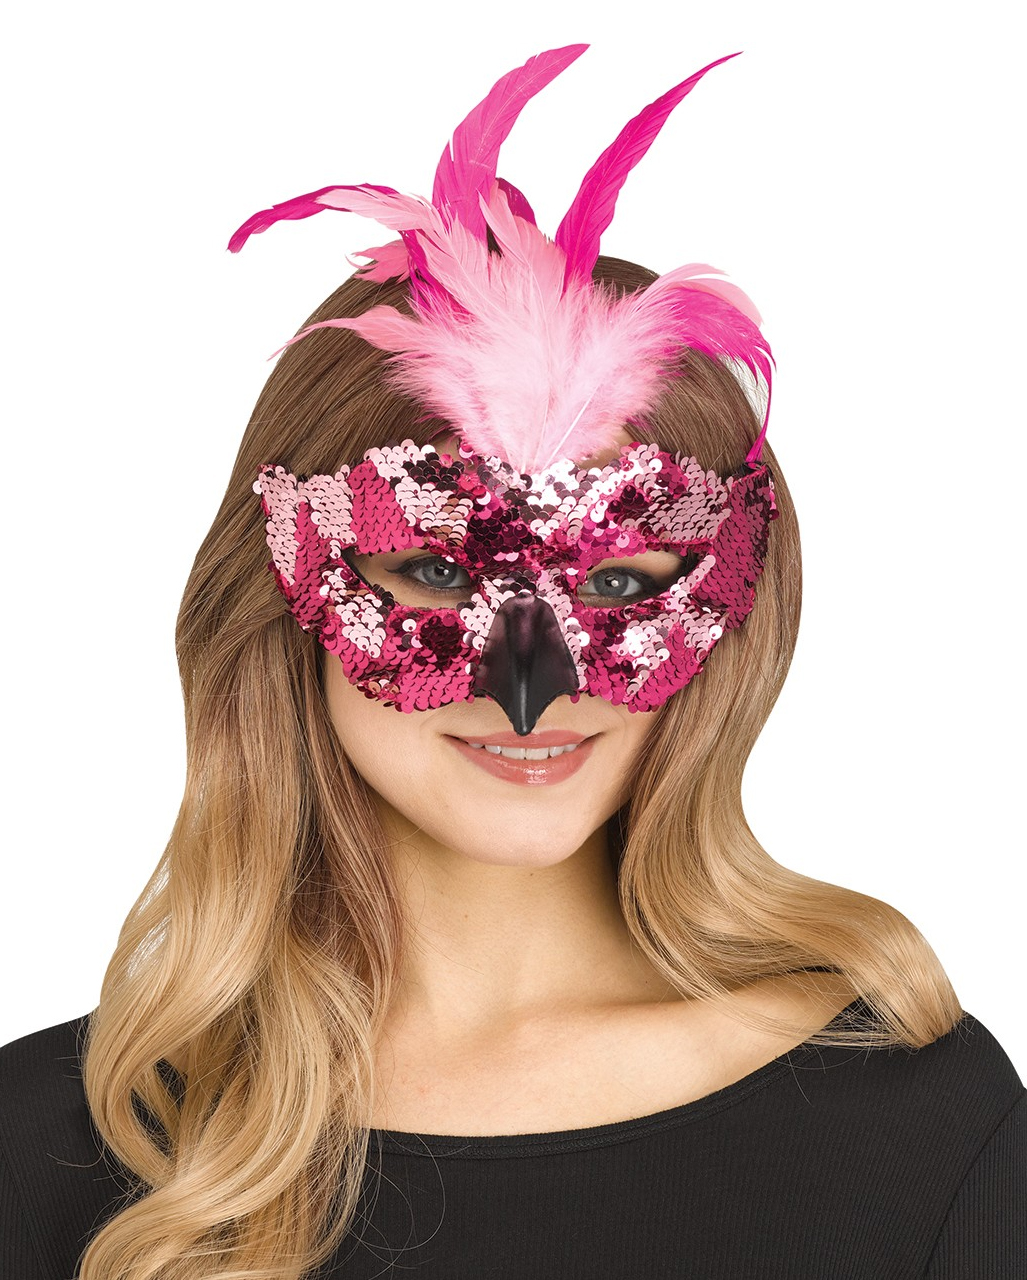 Sequin and Feather Silver Mardi Gras Mask for Fancy Dress Costume Party Masks 